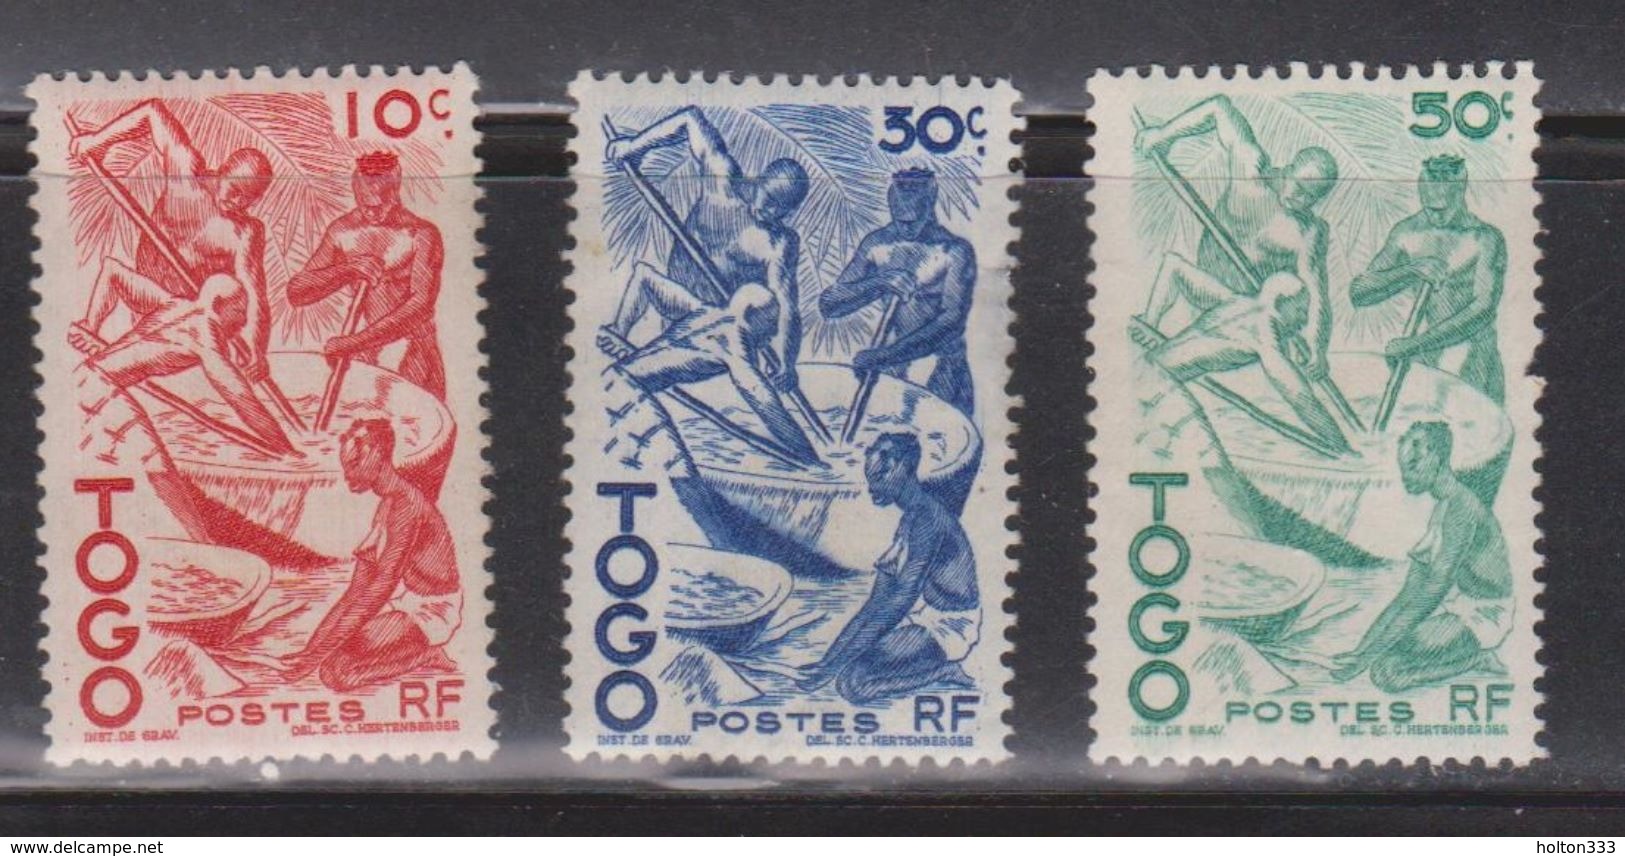 TOGO Scott # 309-11 MH - Used Stamps